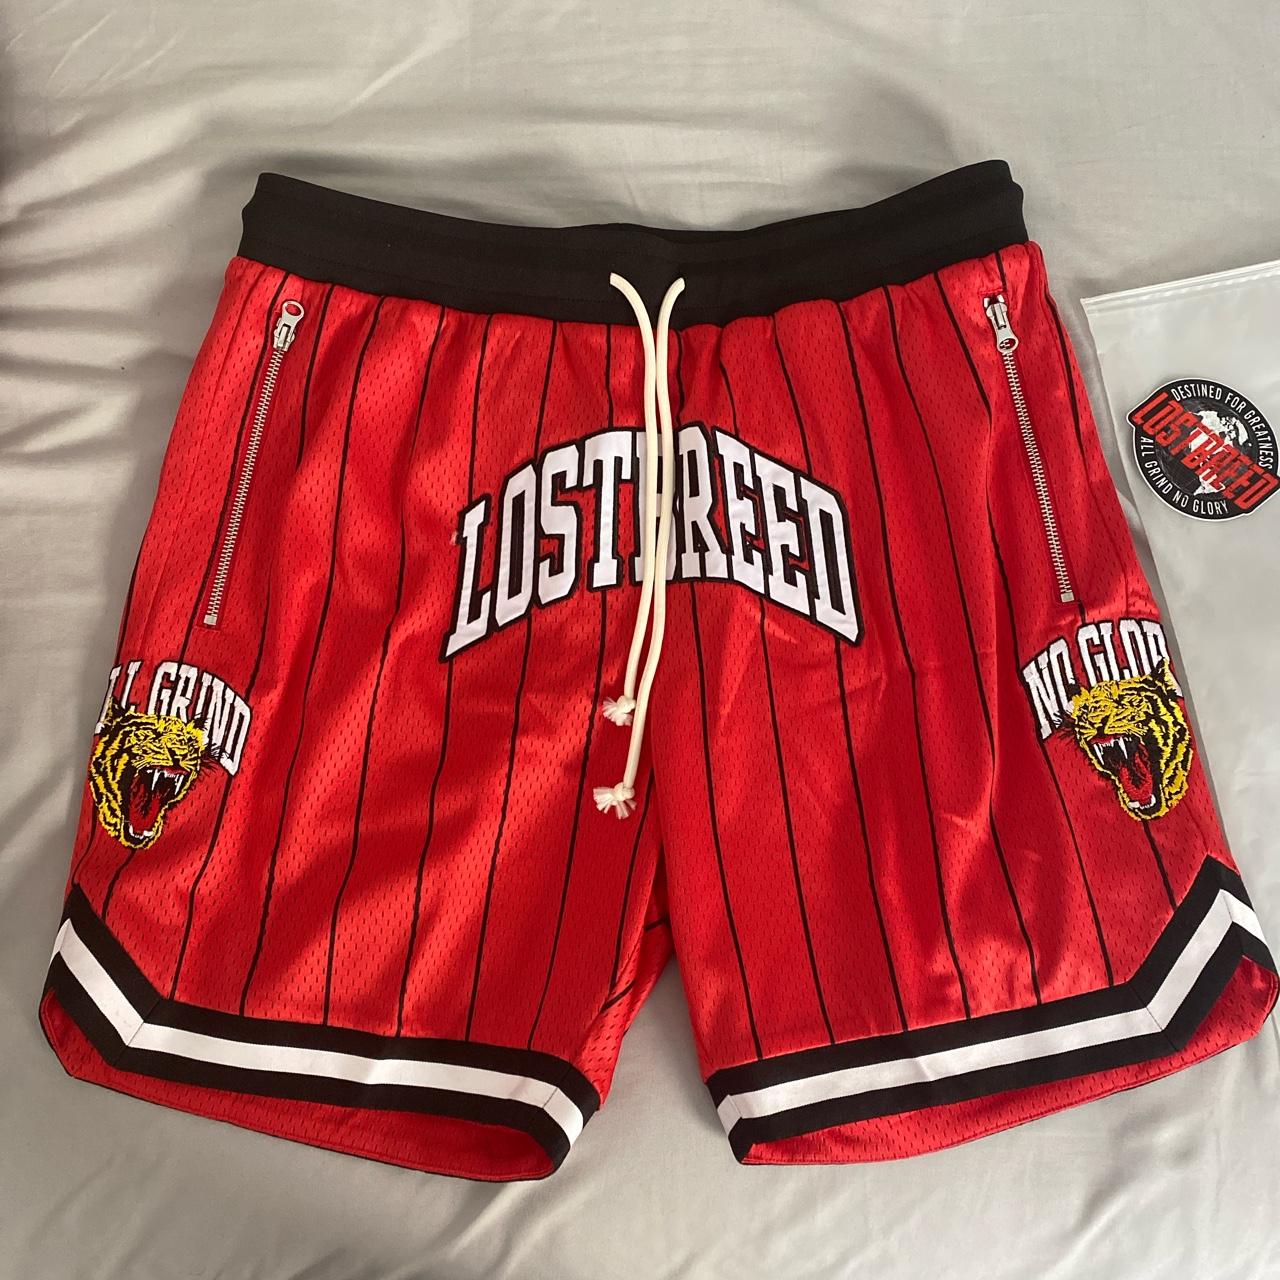 Brand New The Lost Breed Basketball Shorts. If You - Depop